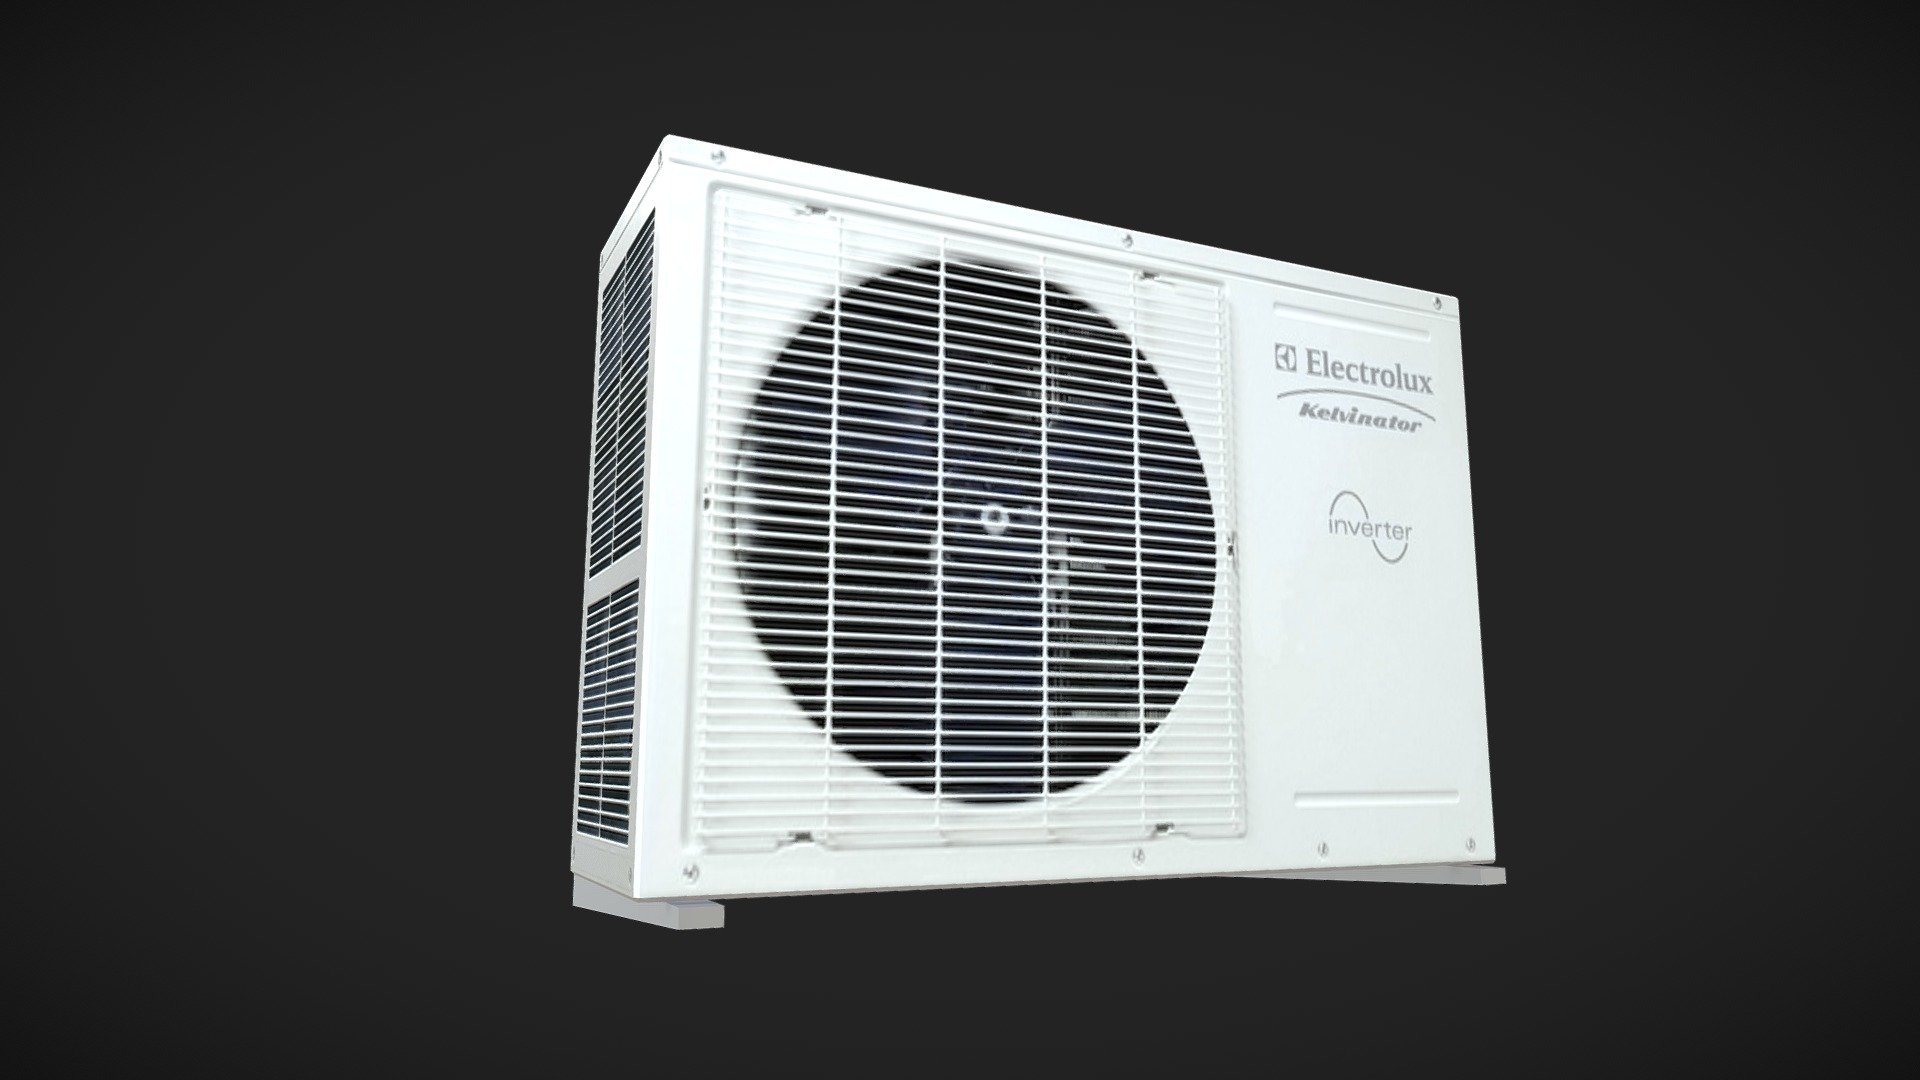 Low poly 3d model of air conditioner unit.

Perfect for architectural visualizations - it renders fast and although it was made for medium distance views, it looks good even on close ups.




Built to real-world scale.

Drag and drop ready - no background objects, cameras and lights in the scene.

V-ray and standard materials version available for 3DSMax.

Polygons: 84
Vertices: 84

Compatible with 3DSMax2009 and up
The _max zip file contains separate v-ray and standard materials scenes.

3DS, FBX, DWG and OBJ versions available - all mapped and textured. Four type of OBJ files exported for Cinema4D, Maya, XSI and Poser 3d model